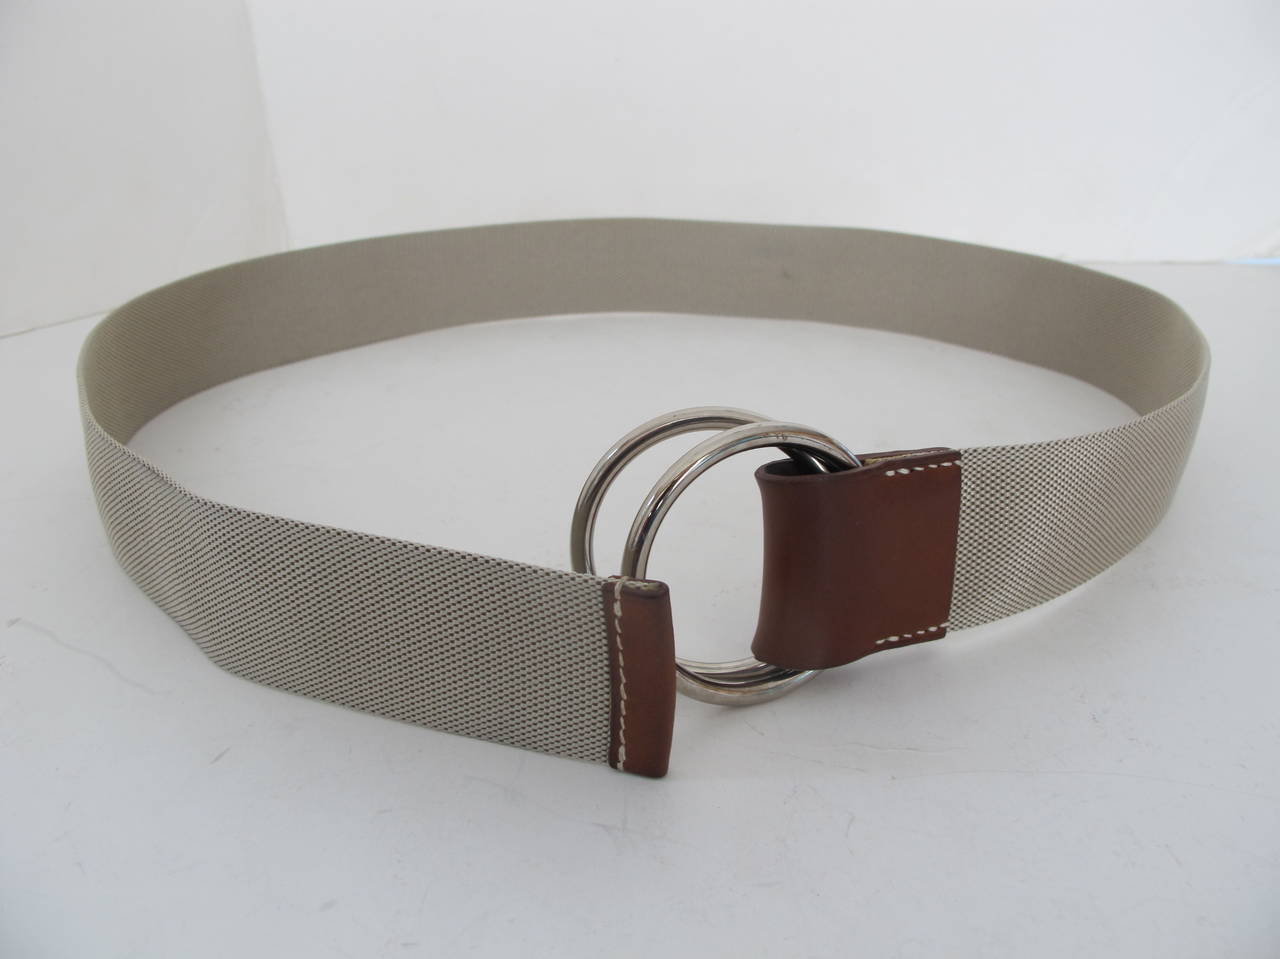 Women's or Men's Hermes Rare Belt with Silver Ring Buckle and Leather Trim